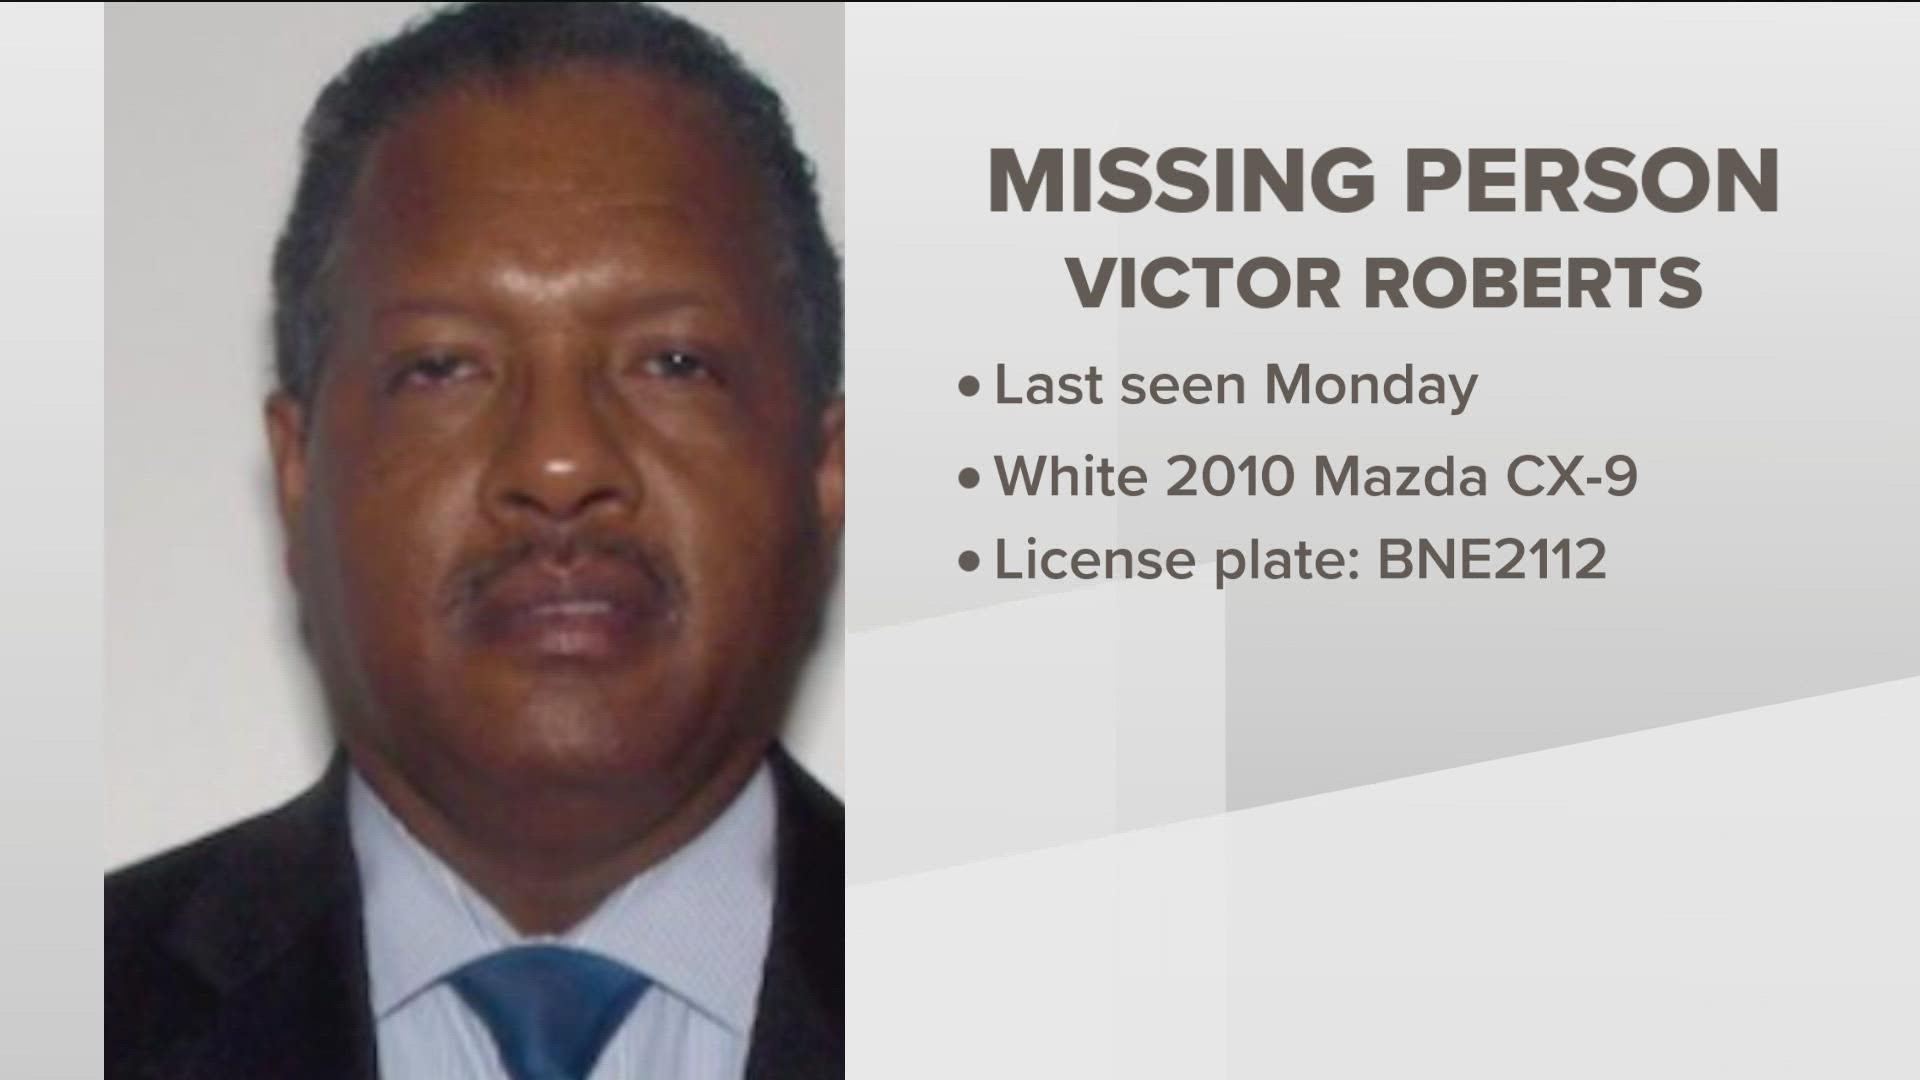 He was last seen leaving for work Monday morning.